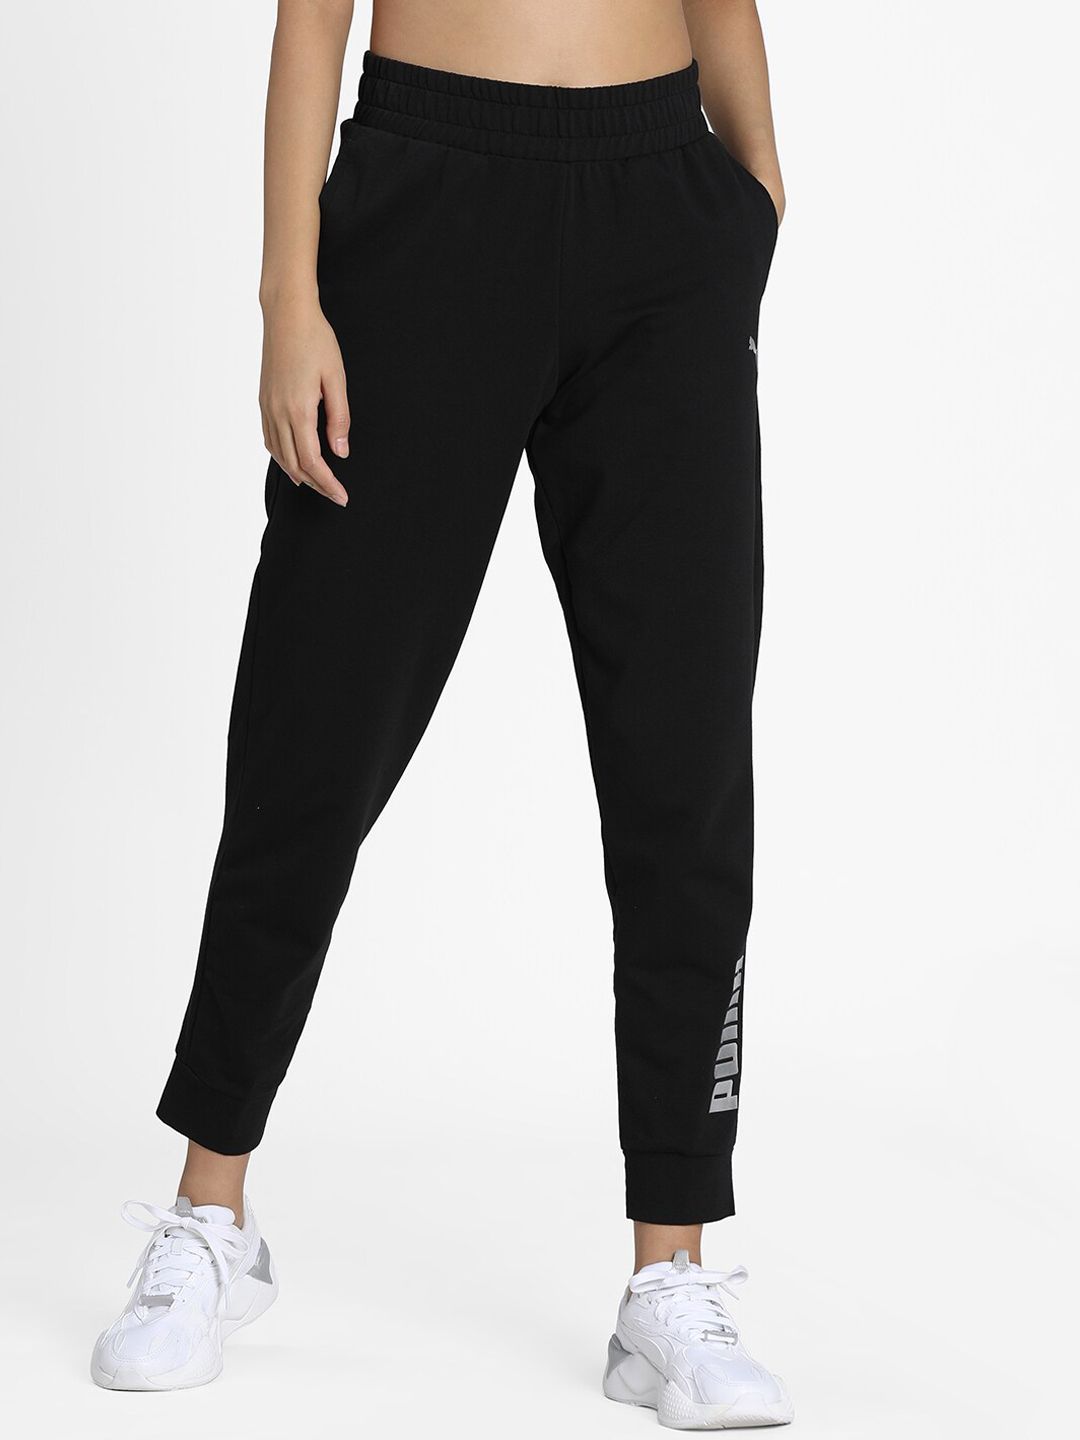 Puma Women Black Printed RTG Knitted dryCELL Sweatpants Price in India